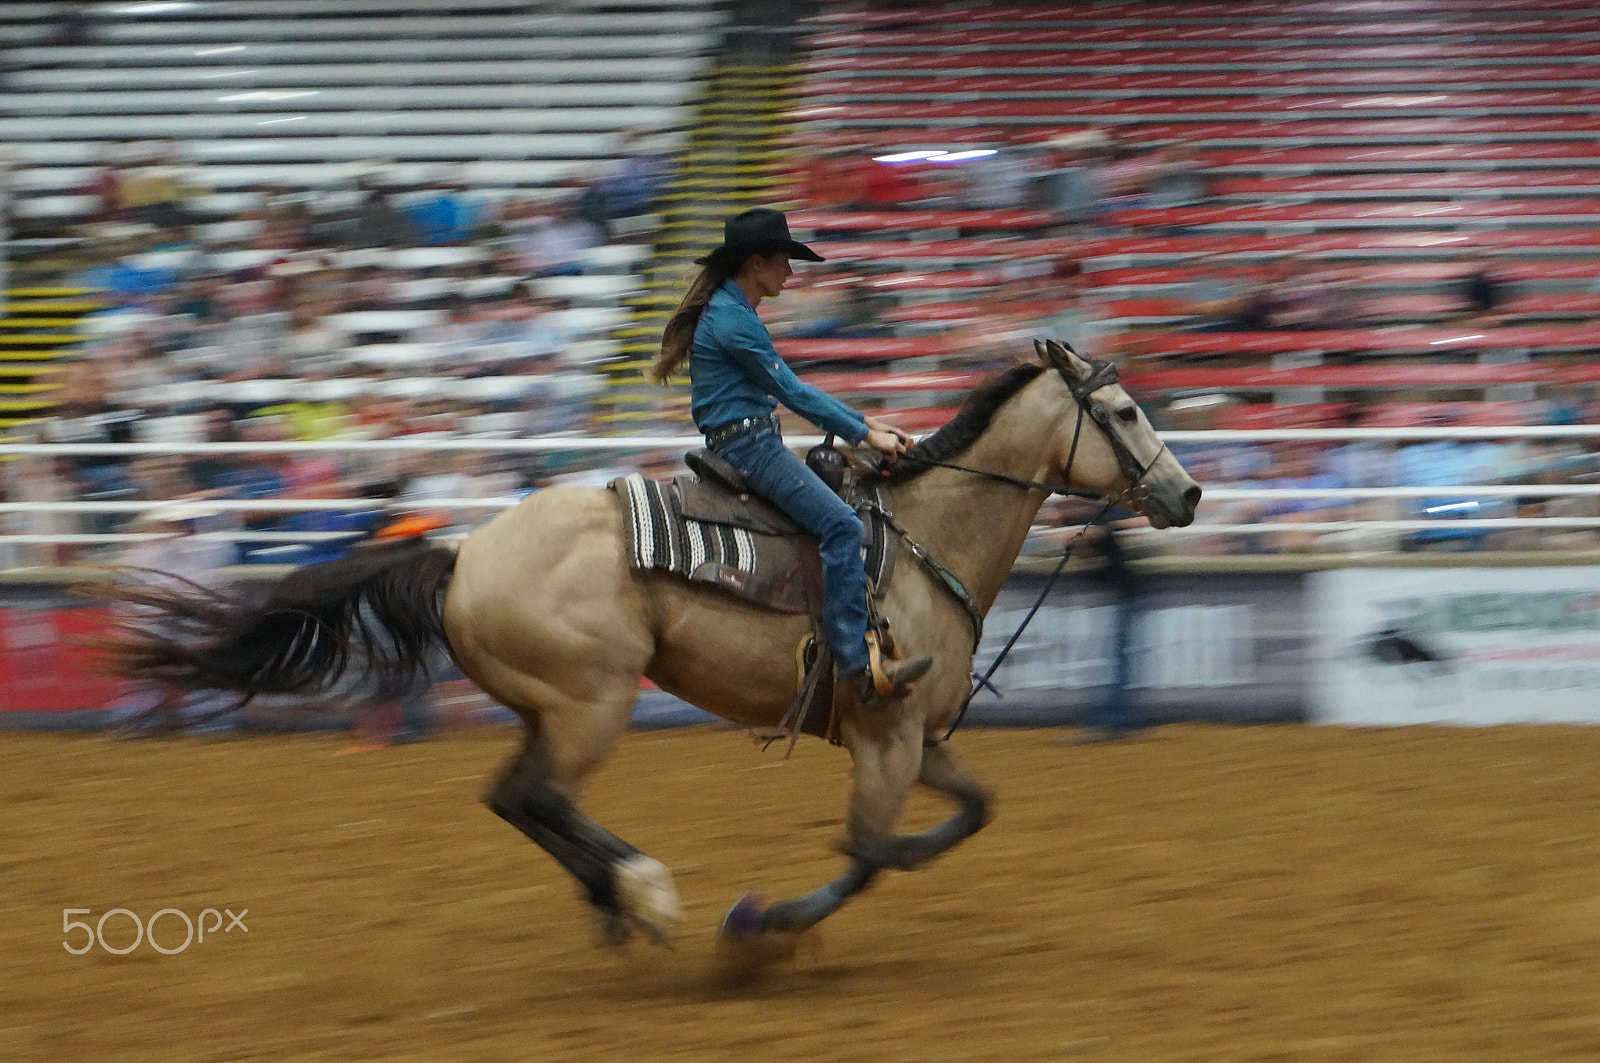 Sony Alpha NEX-5T sample photo. A horse rider at a rodeo show photography